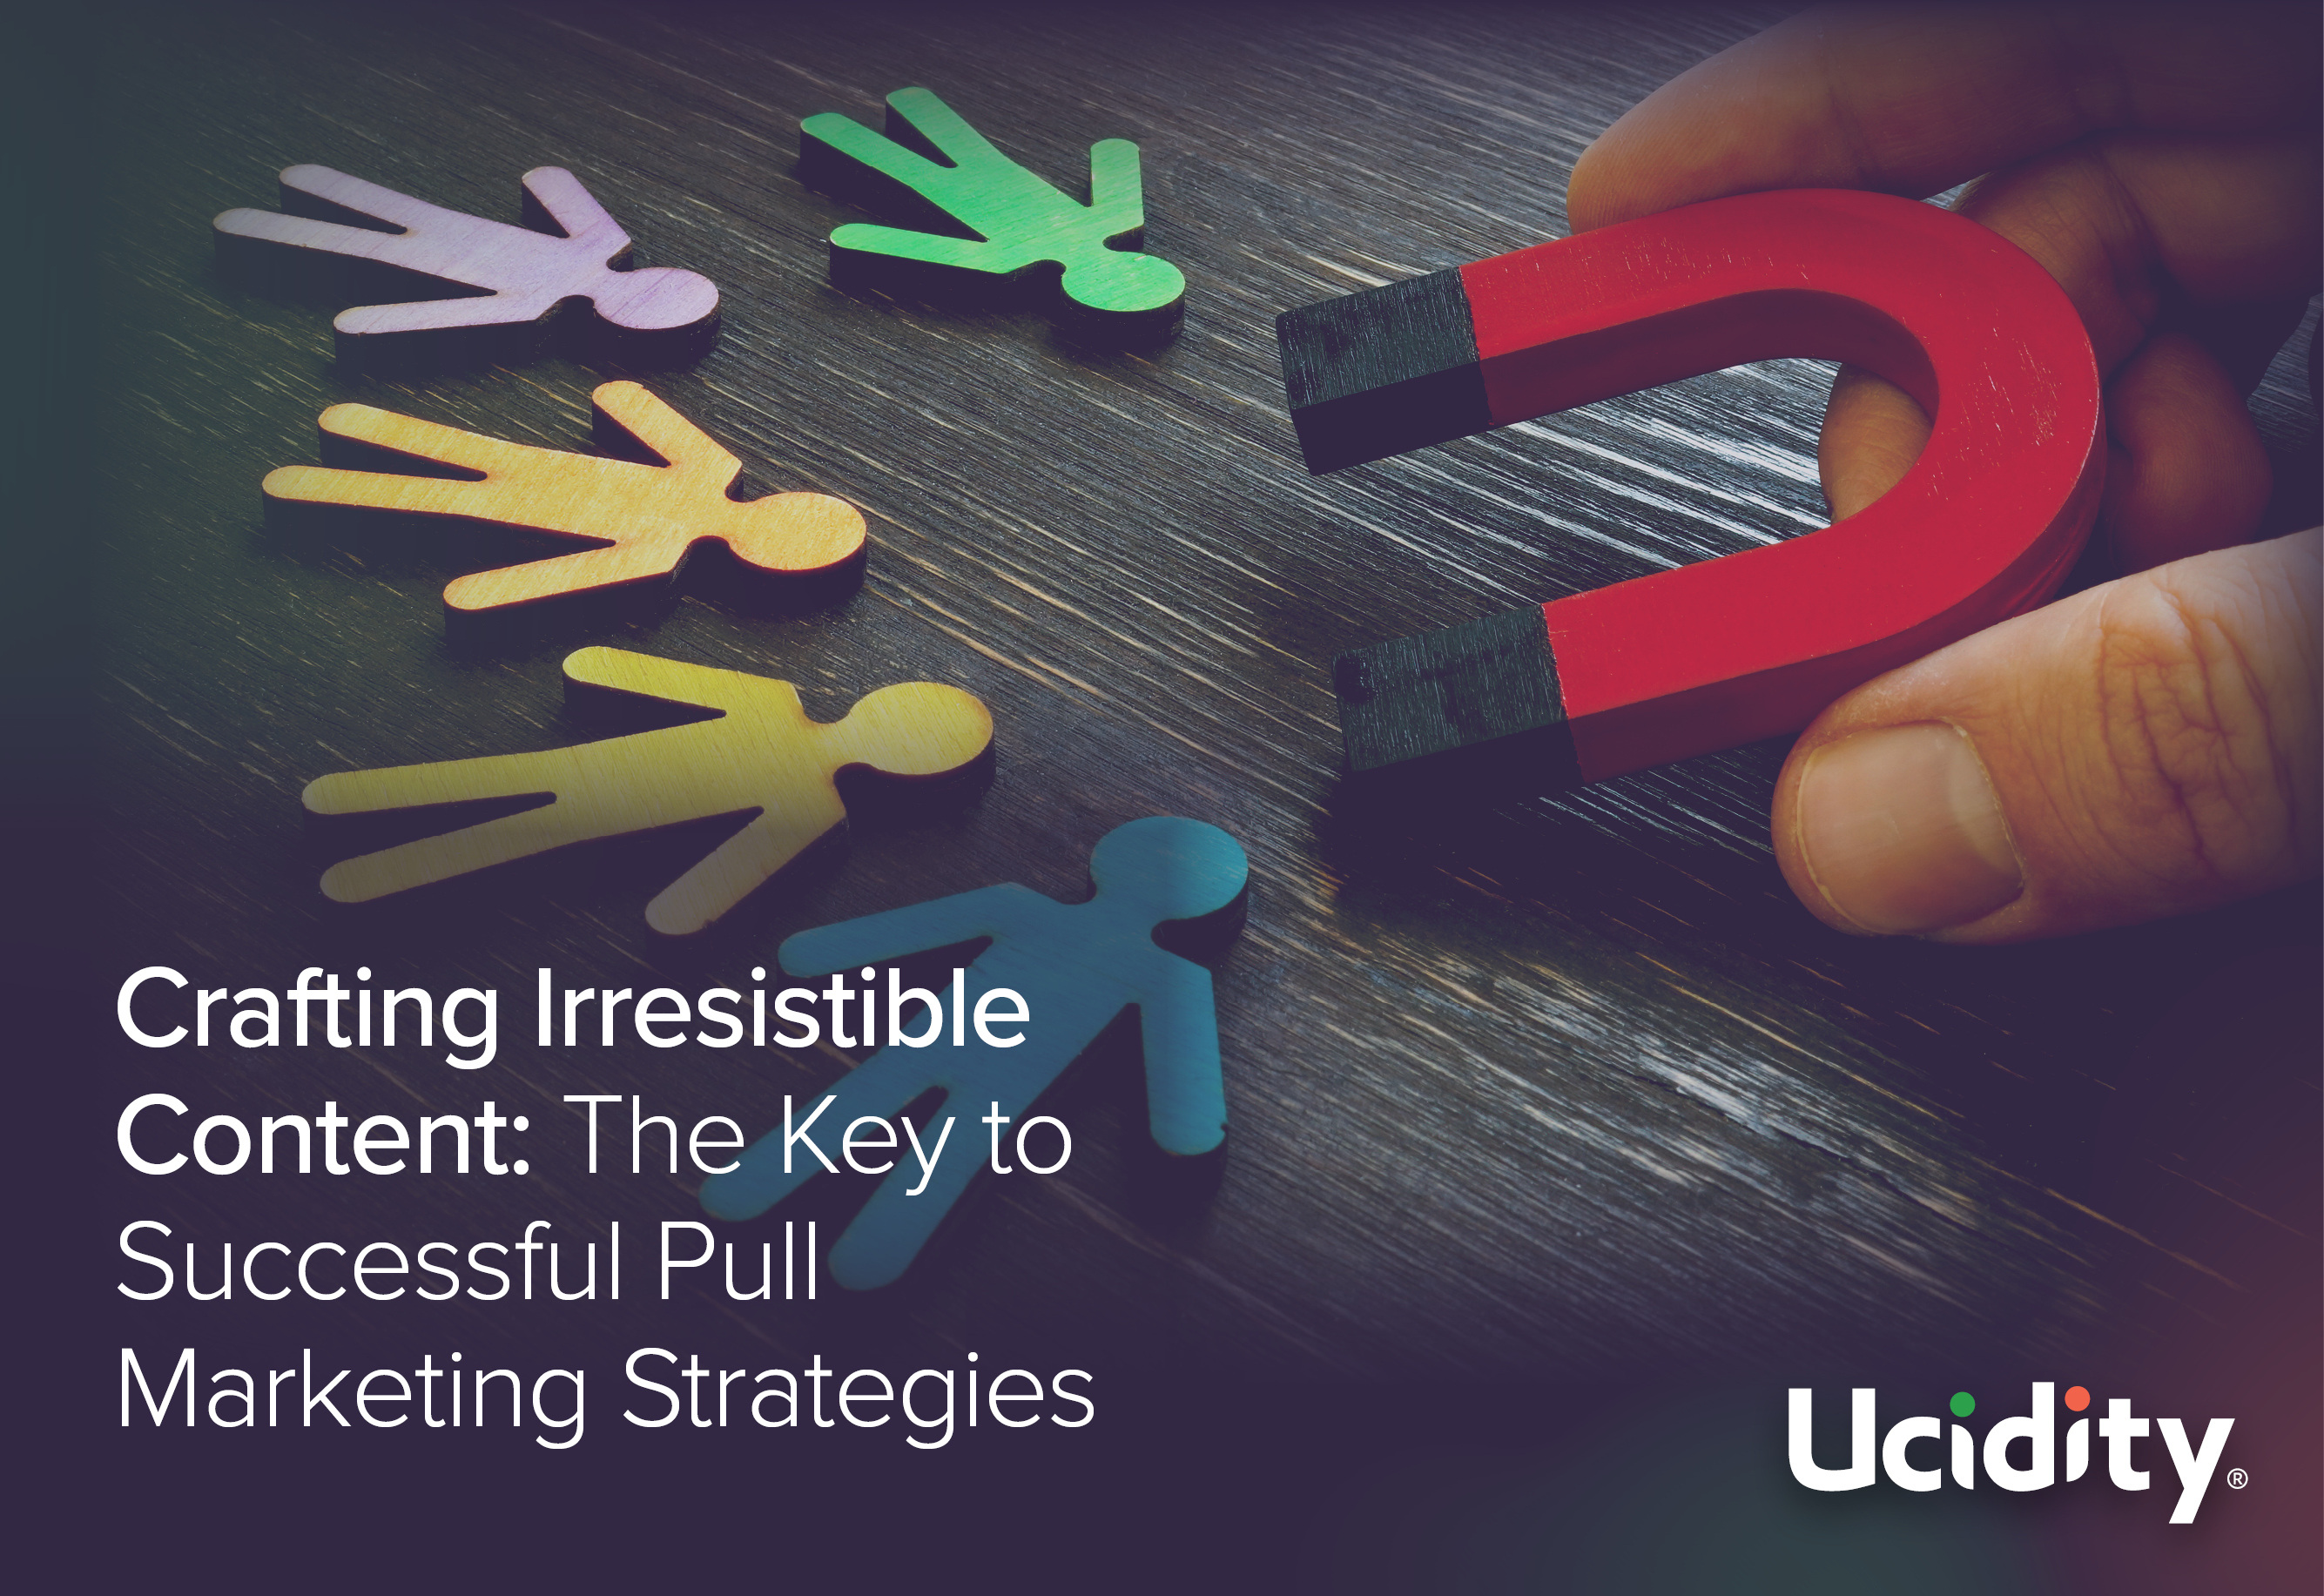 Crafting Irresistible Content: The Key to Successful Pull Marketing Strategies